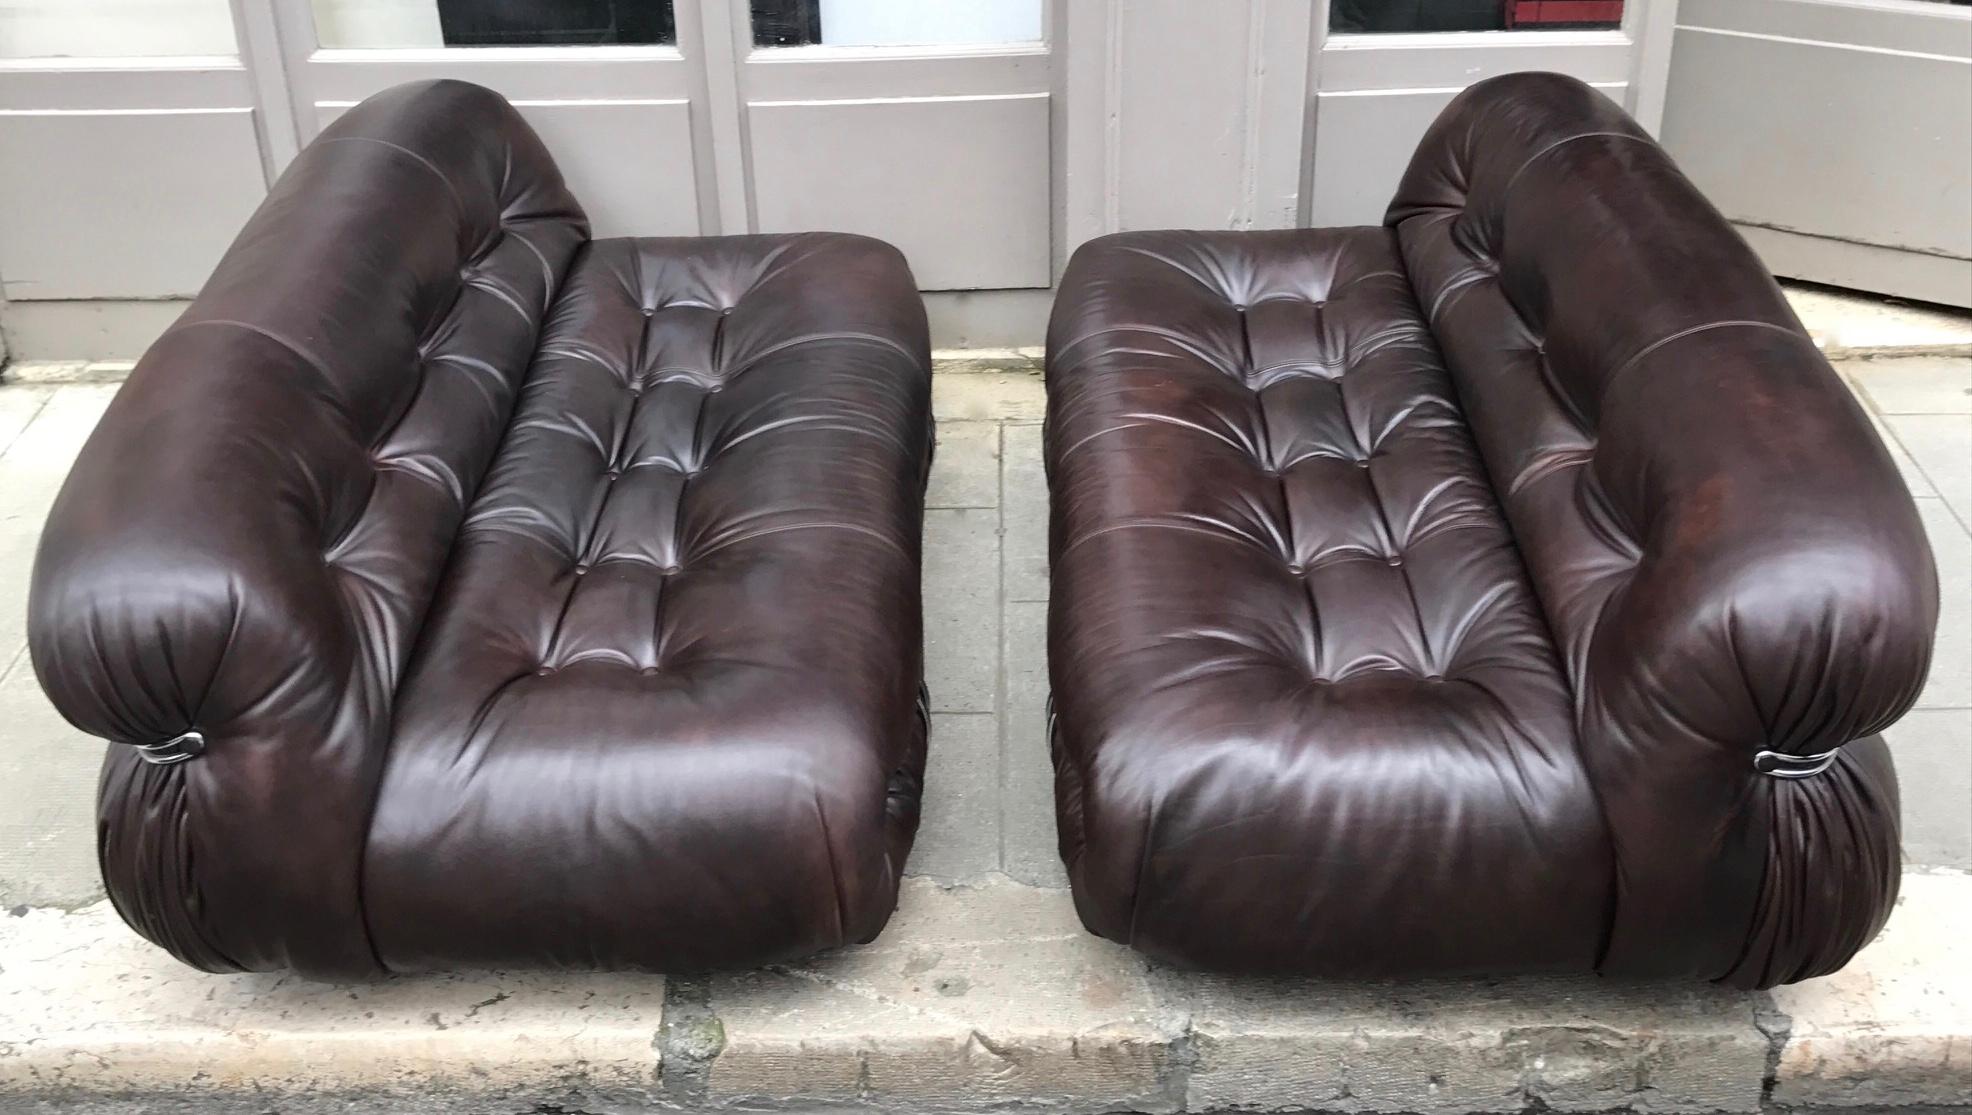 Pair of original leather Soriana designed sofa by Afra & Tobia Scaprp for Cassina, circa 1970
Beautiful patina leather, perfect condition, chocolate coffee color
Measures: H 25 in. x W 67 in. x D 38 in.
    